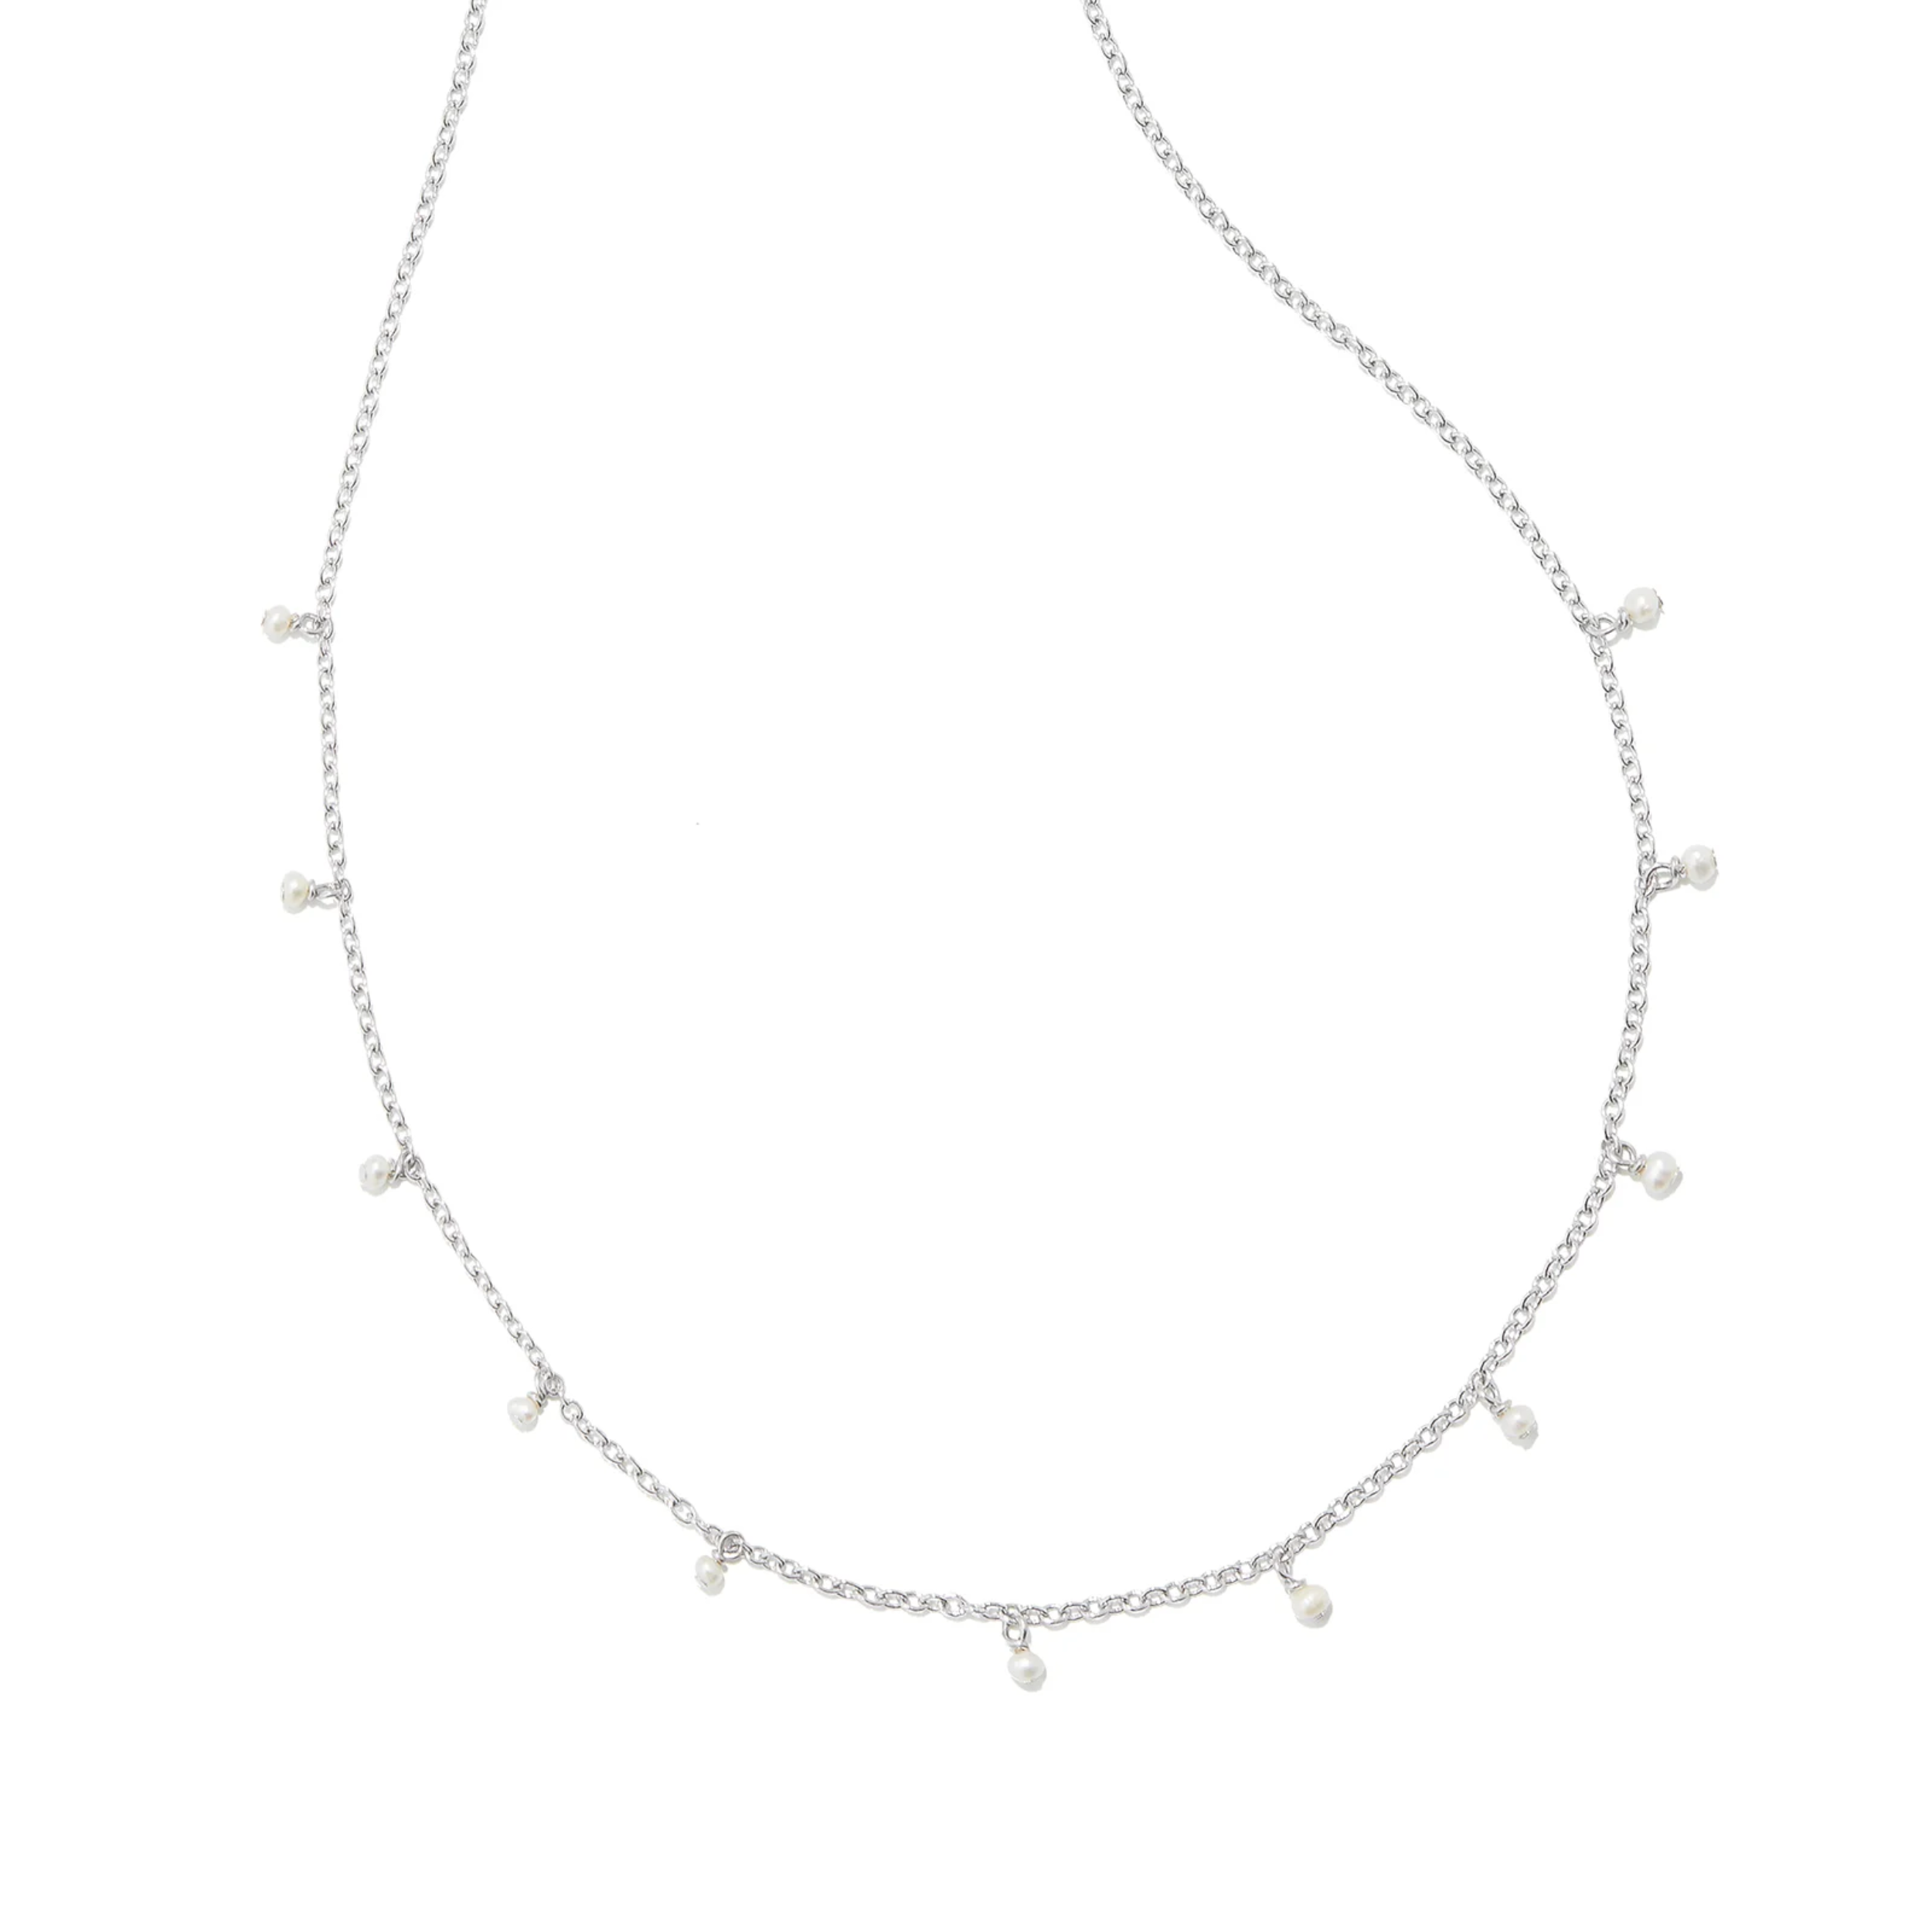 This Willa Silver Pearl Strand Necklace in White Pearl by Kendra Scott is pictured on a white background.